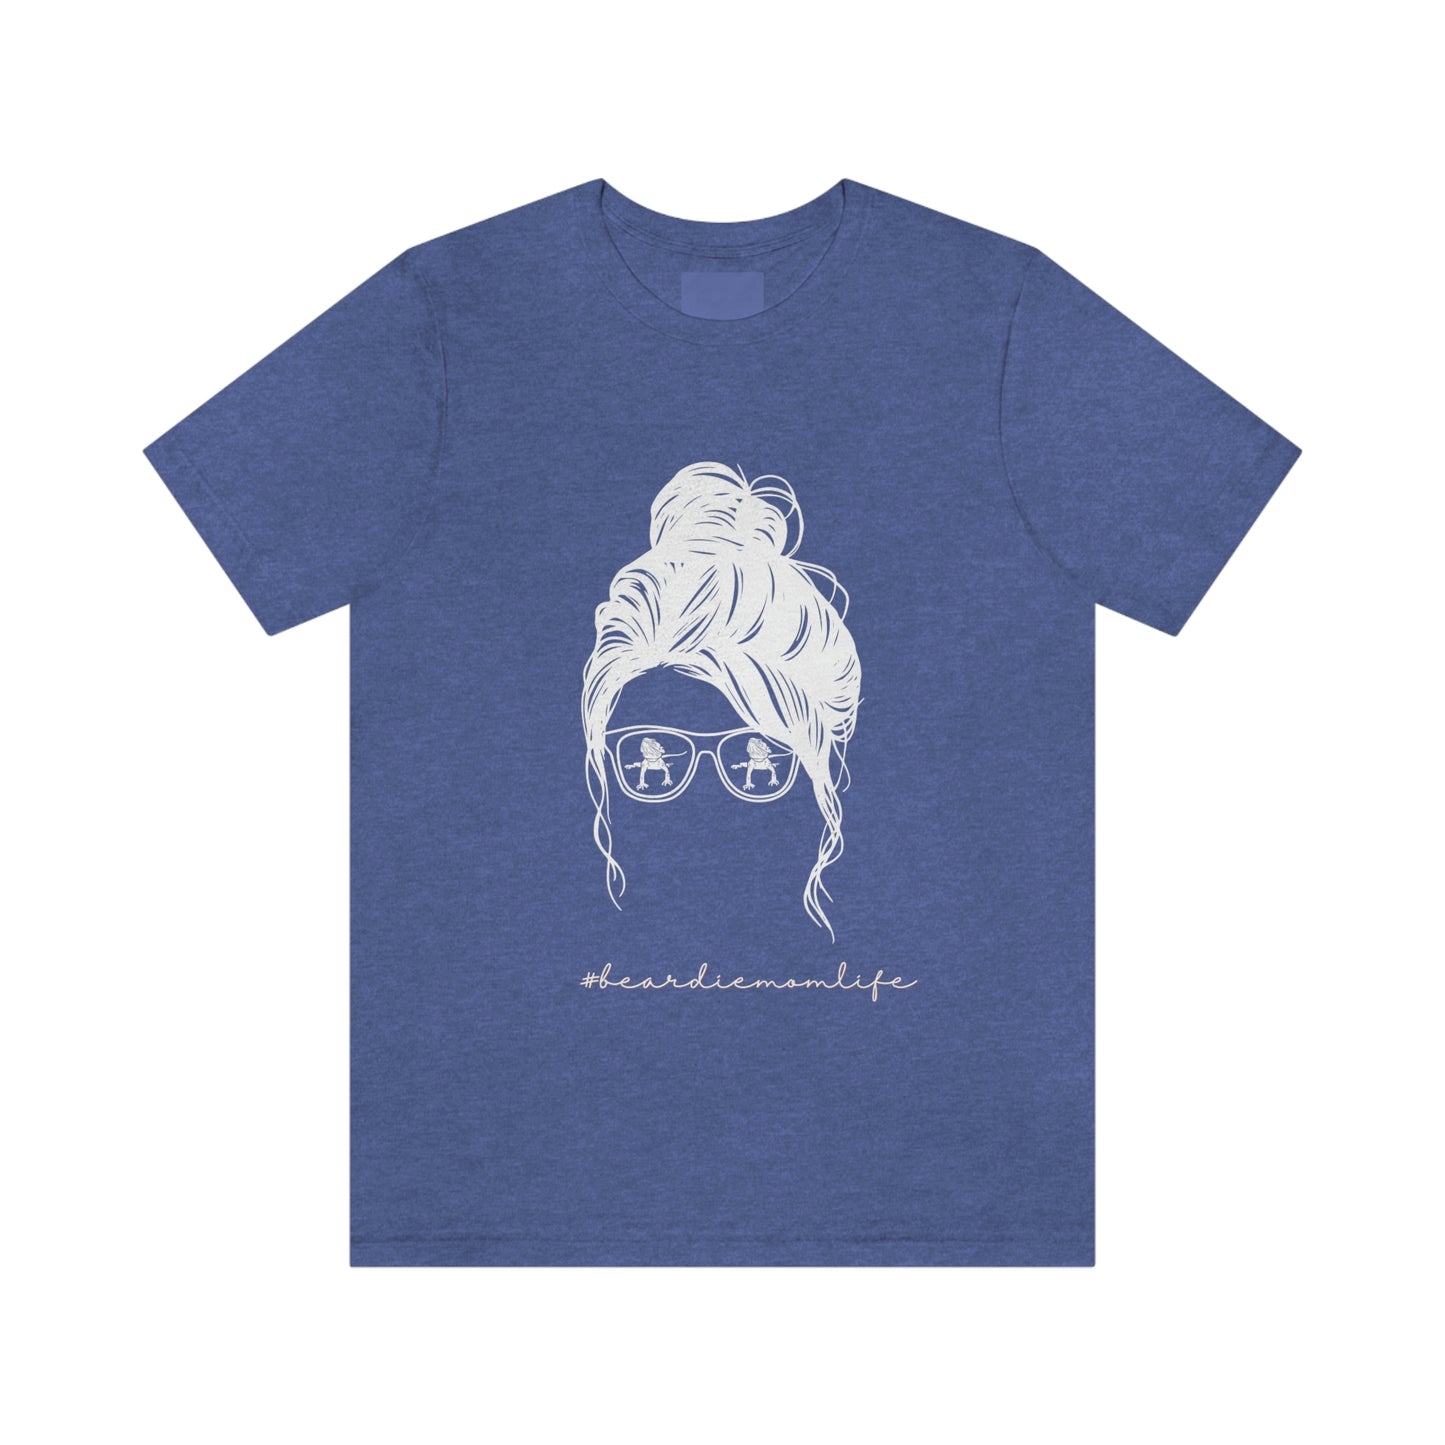 Beardie Mom Life T shirt for the Bearded dragon loving mom in your life! Reptile loving mother's day gift